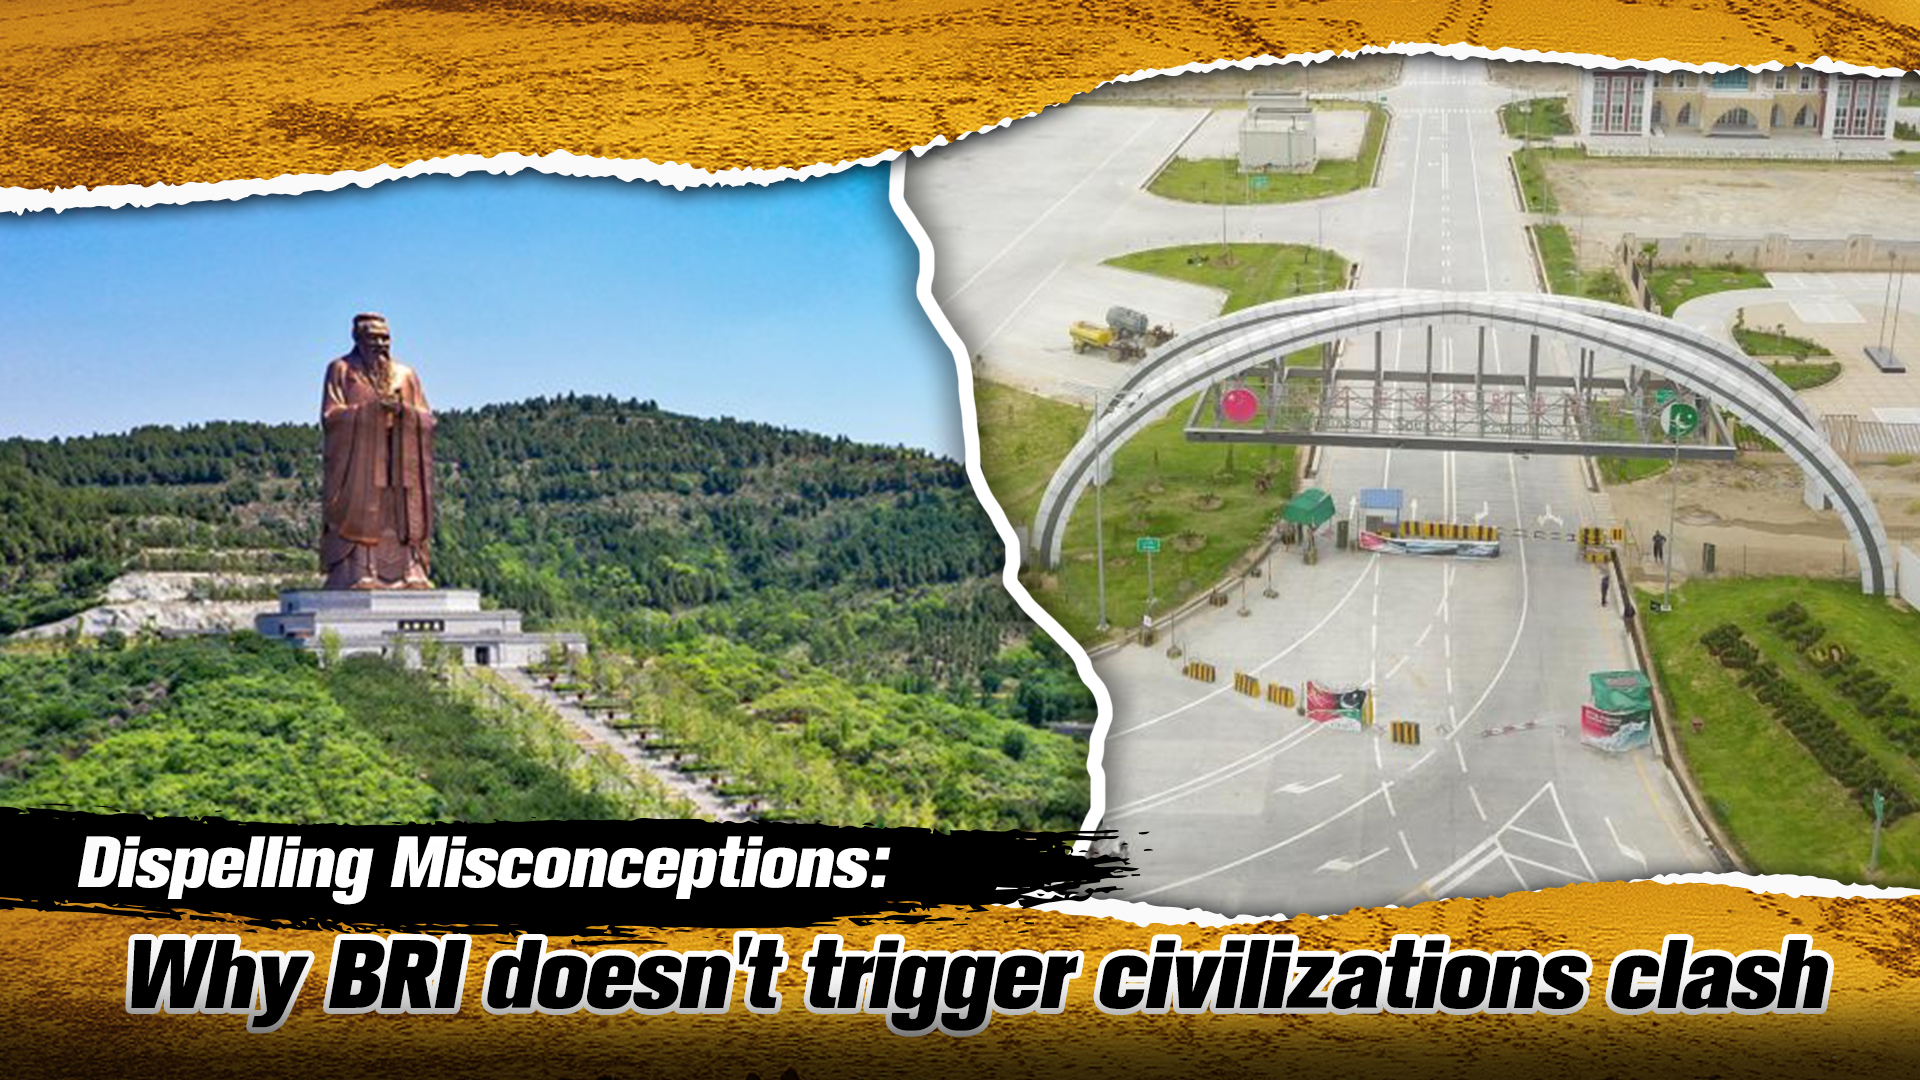 Dispelling Misconceptions: Why BRI doesn't trigger civilizations clash